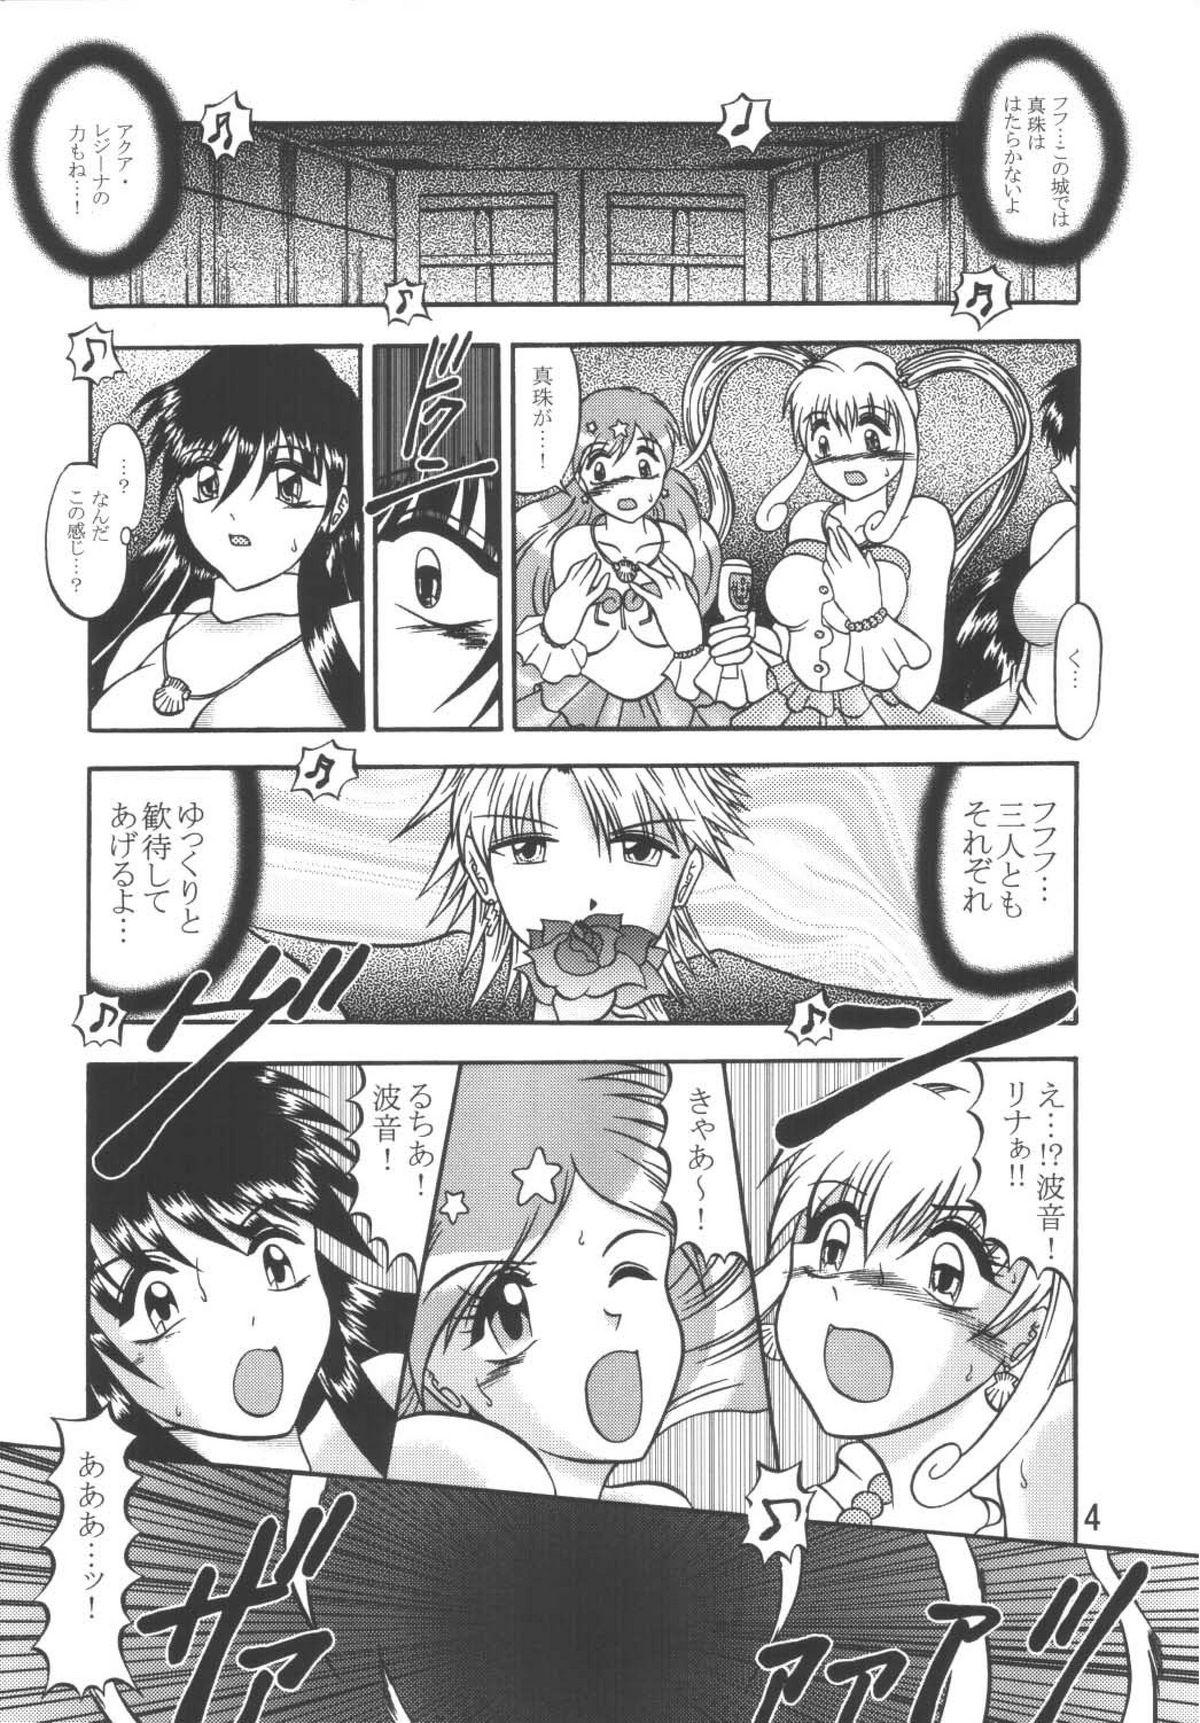 Couples Fucking VOICE in the DARK - Mermaid melody pichi pichi pitch Blow Job Movies - Page 4